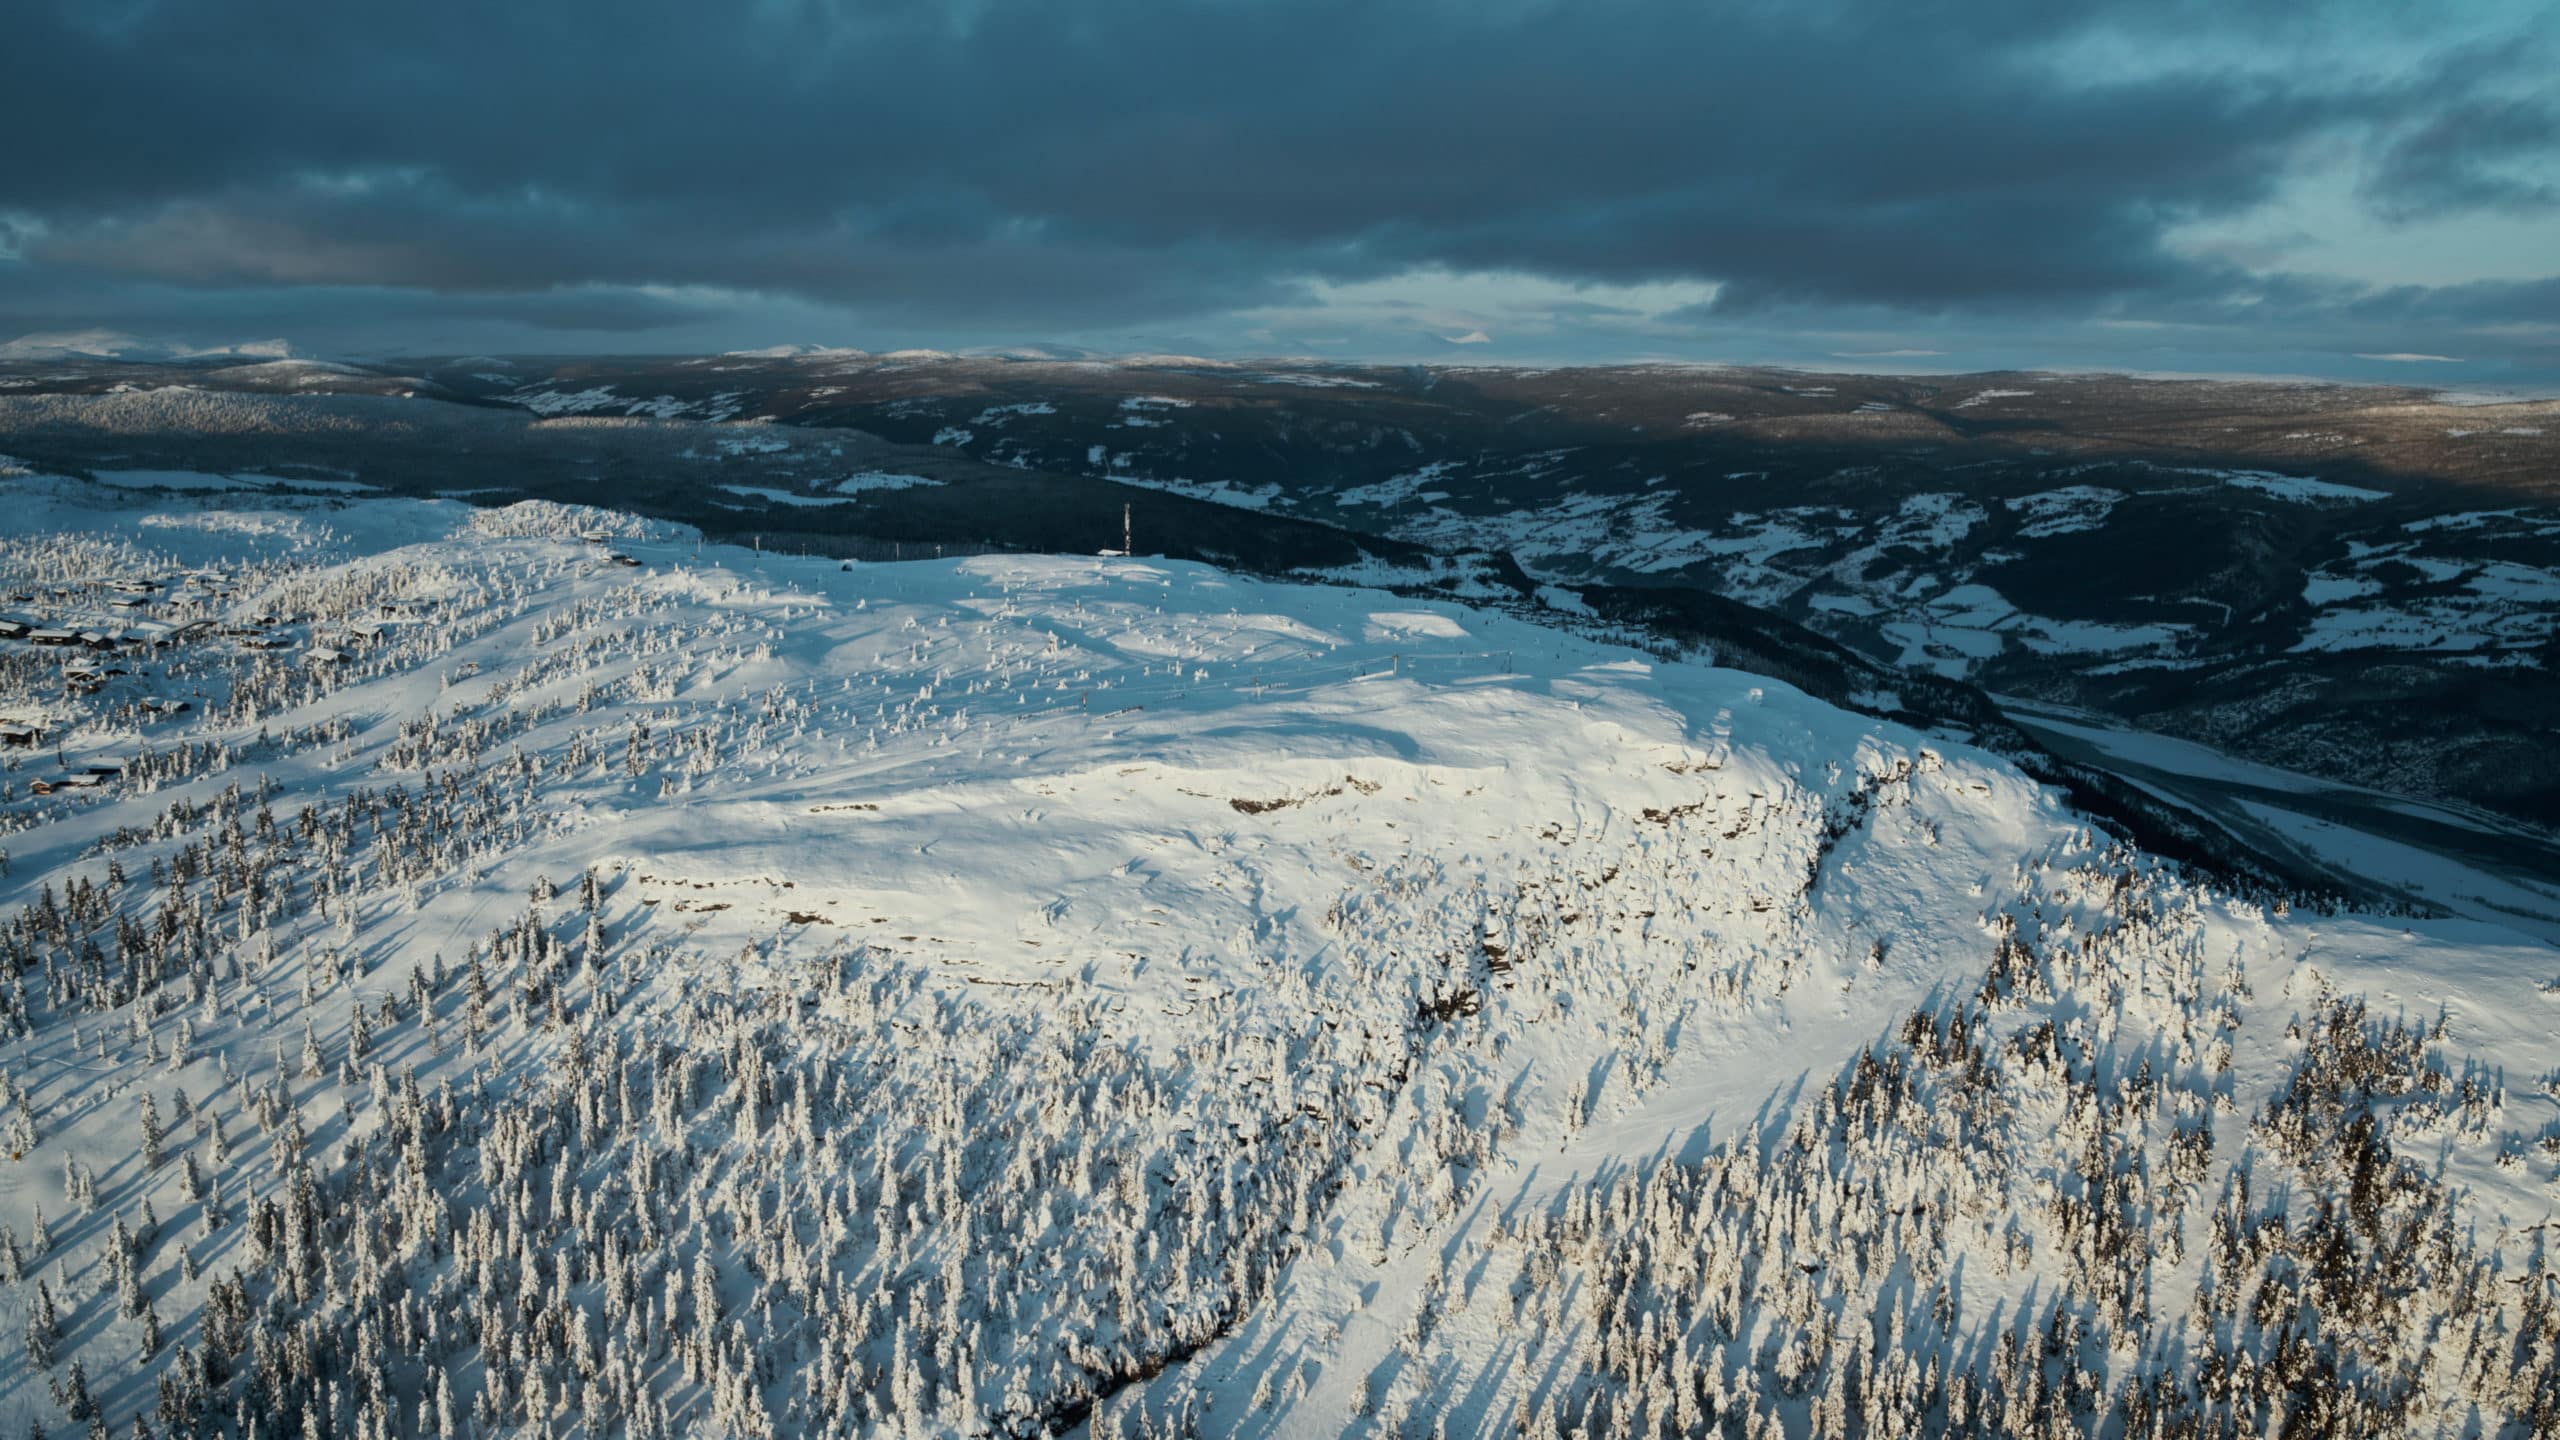 View of Kvitfjell mountain covered by snow and trees with a low hanging sun.